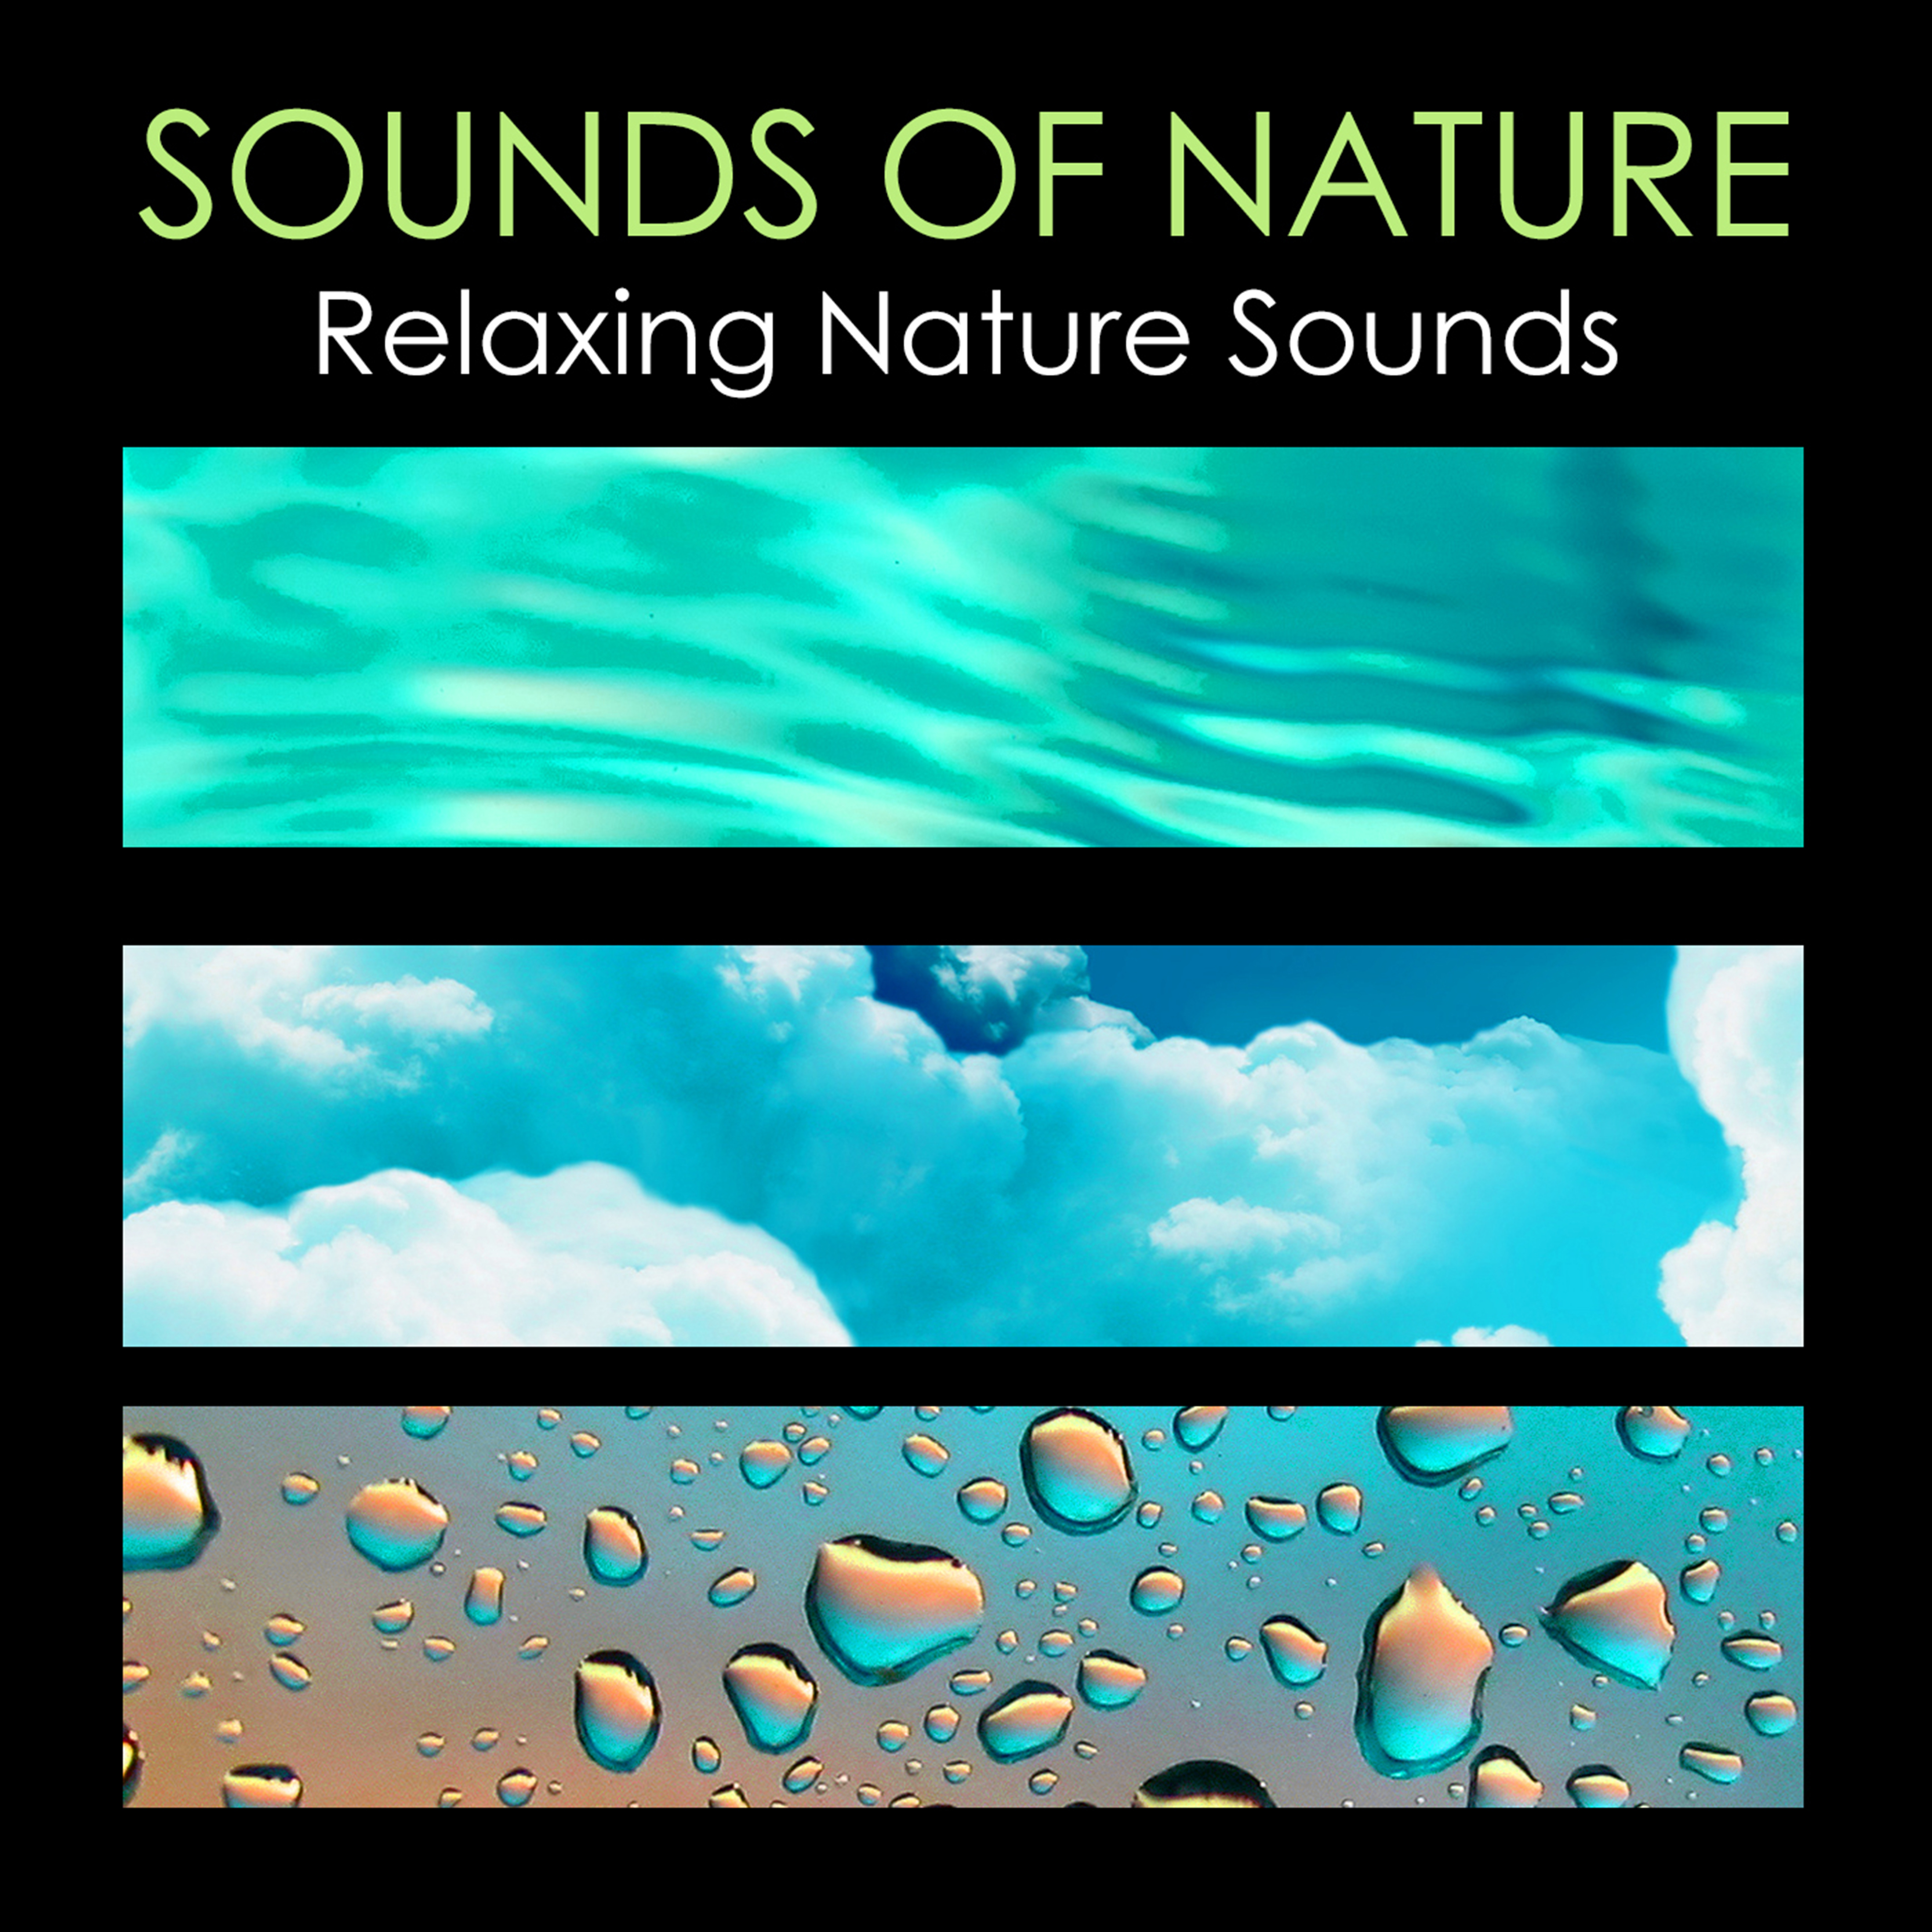 Water Sound and Tibetan Bells - Chirping Birds for a Peaceful Meditation Session